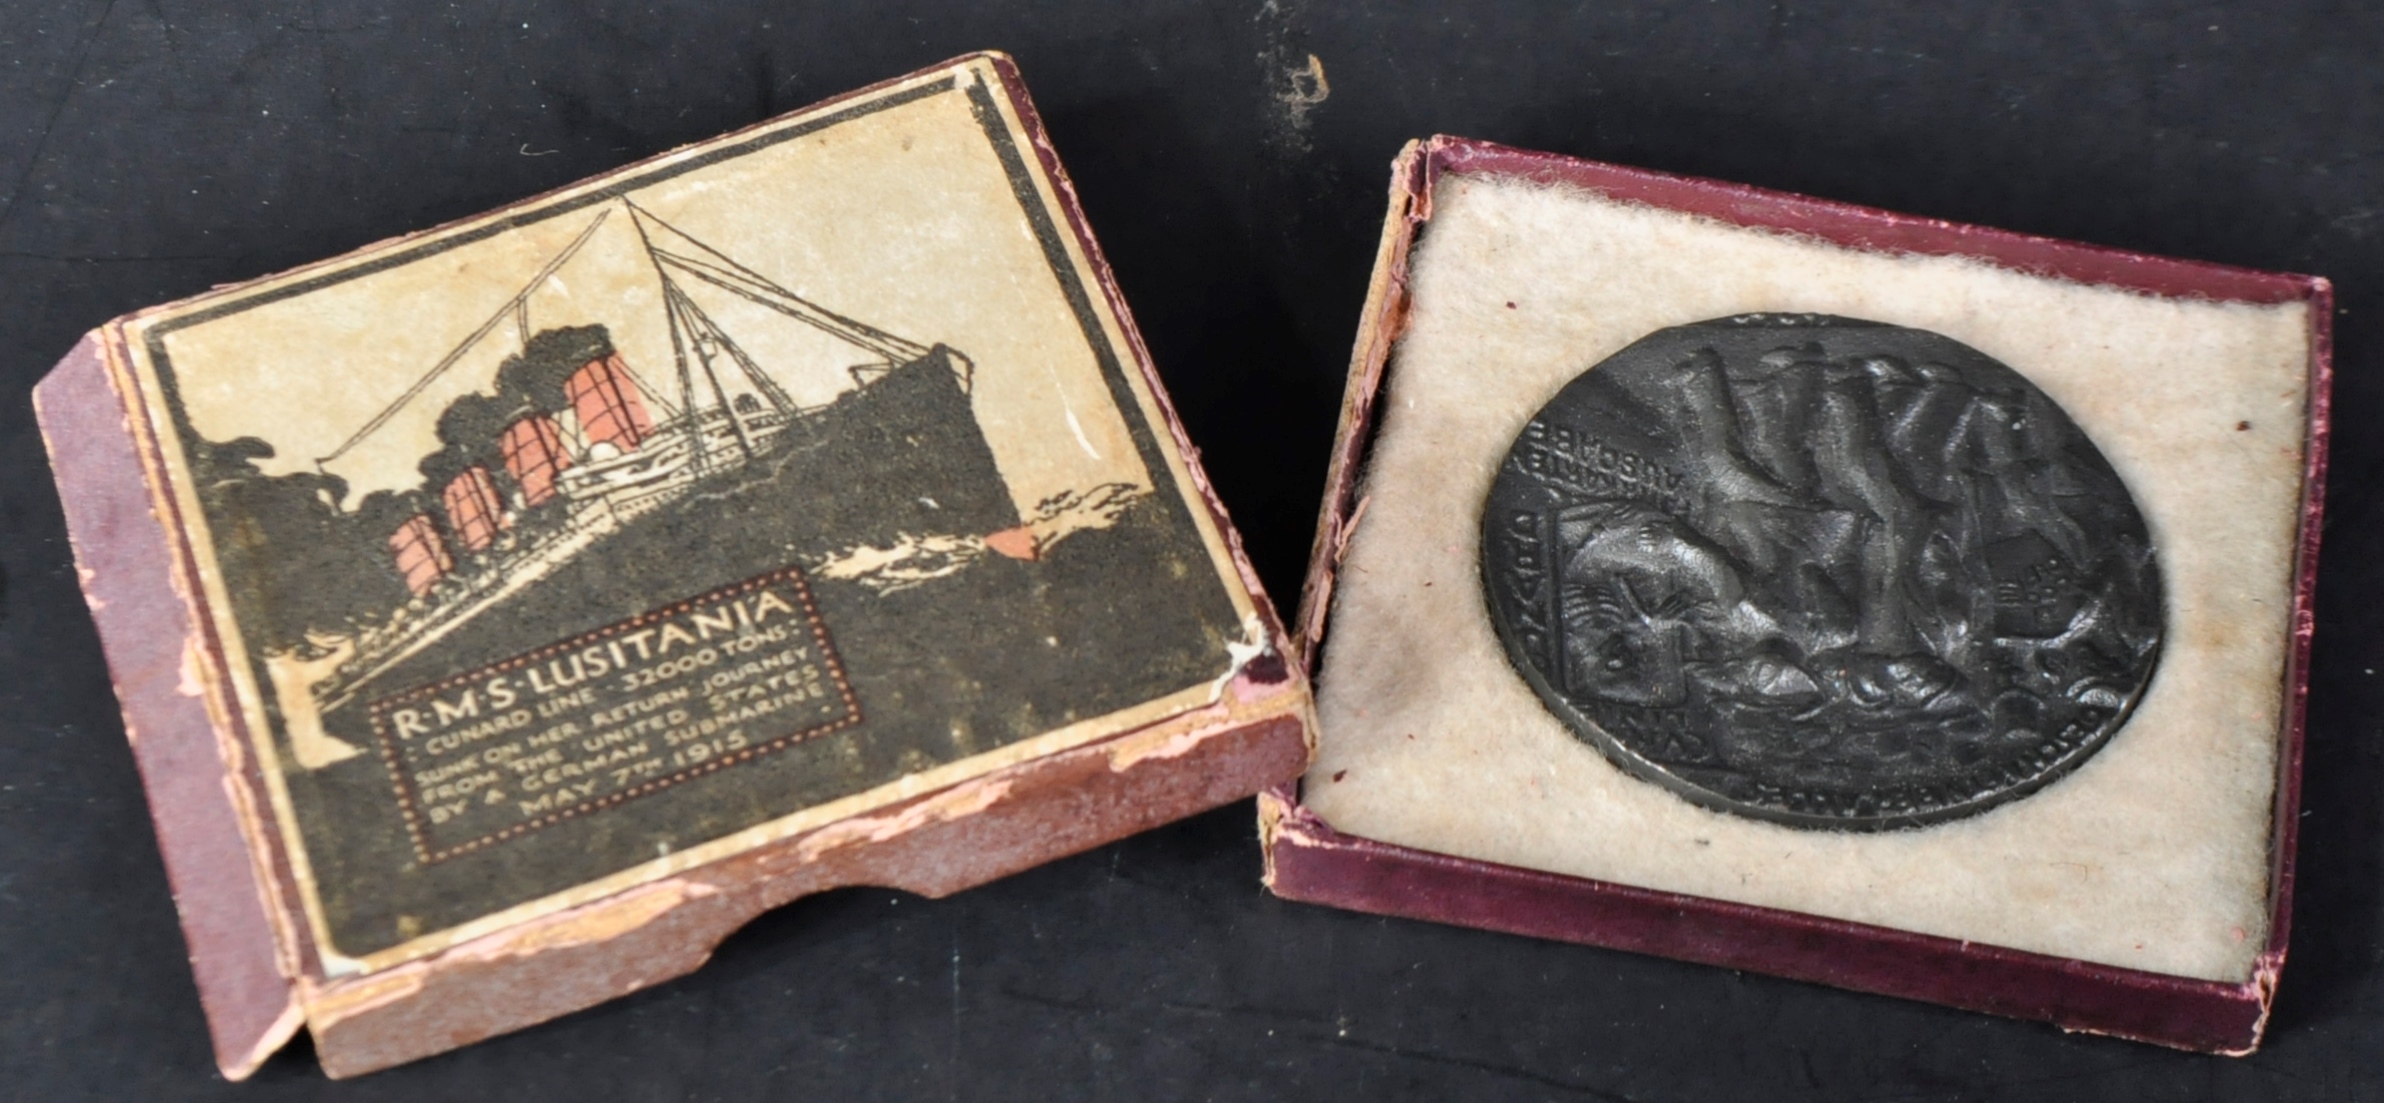 RMS LUSITANIA - WWI FIRST WORLD WAR PERIOD SINKING MEDAL - Image 2 of 4